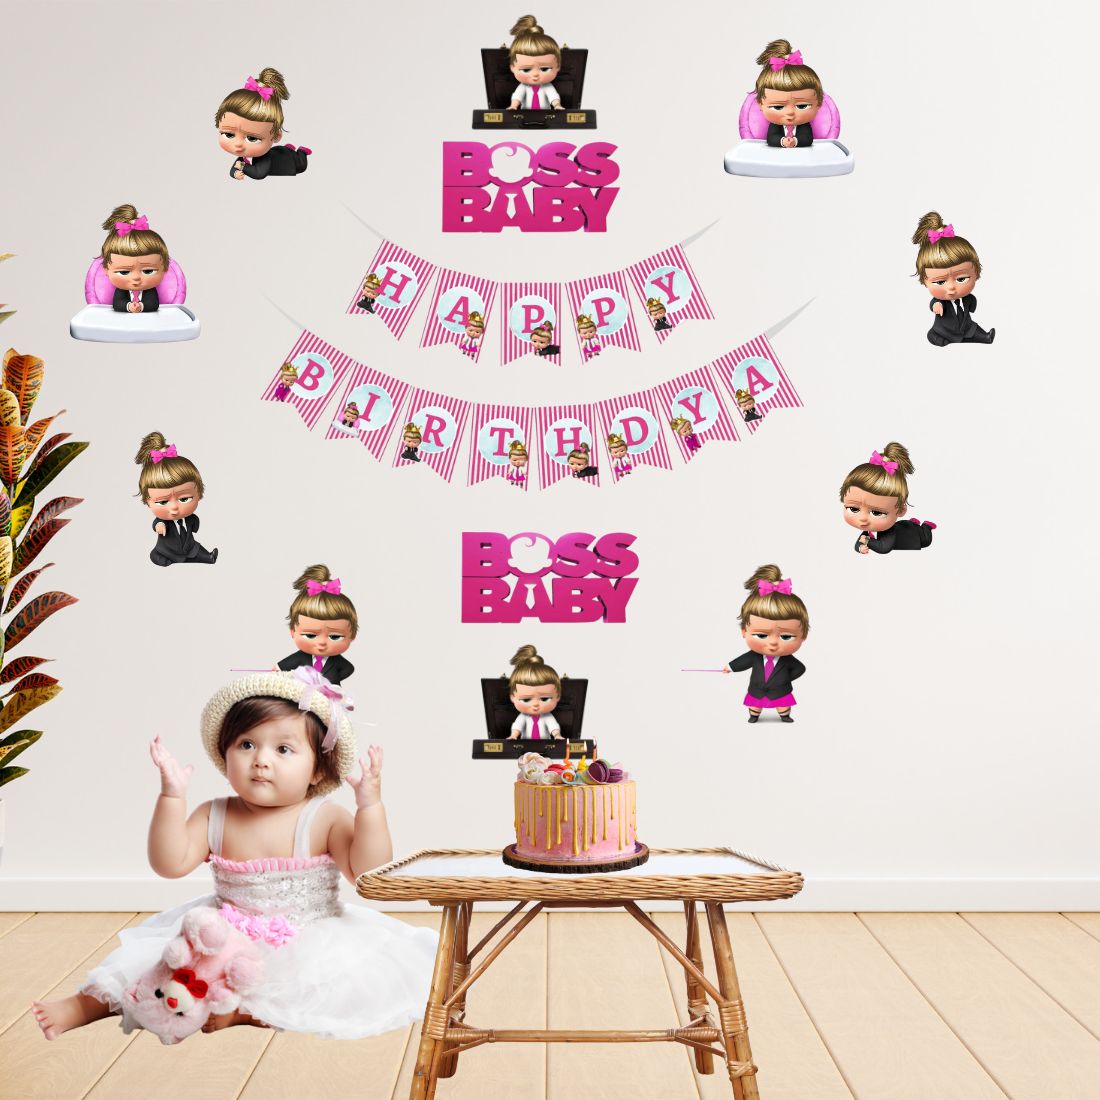 Boss Baby Girl Adventure Birthday Party Decorations - Banner, Cutouts (6 inches/250 GSM Cardstock/Mixcolour/25Pcs)